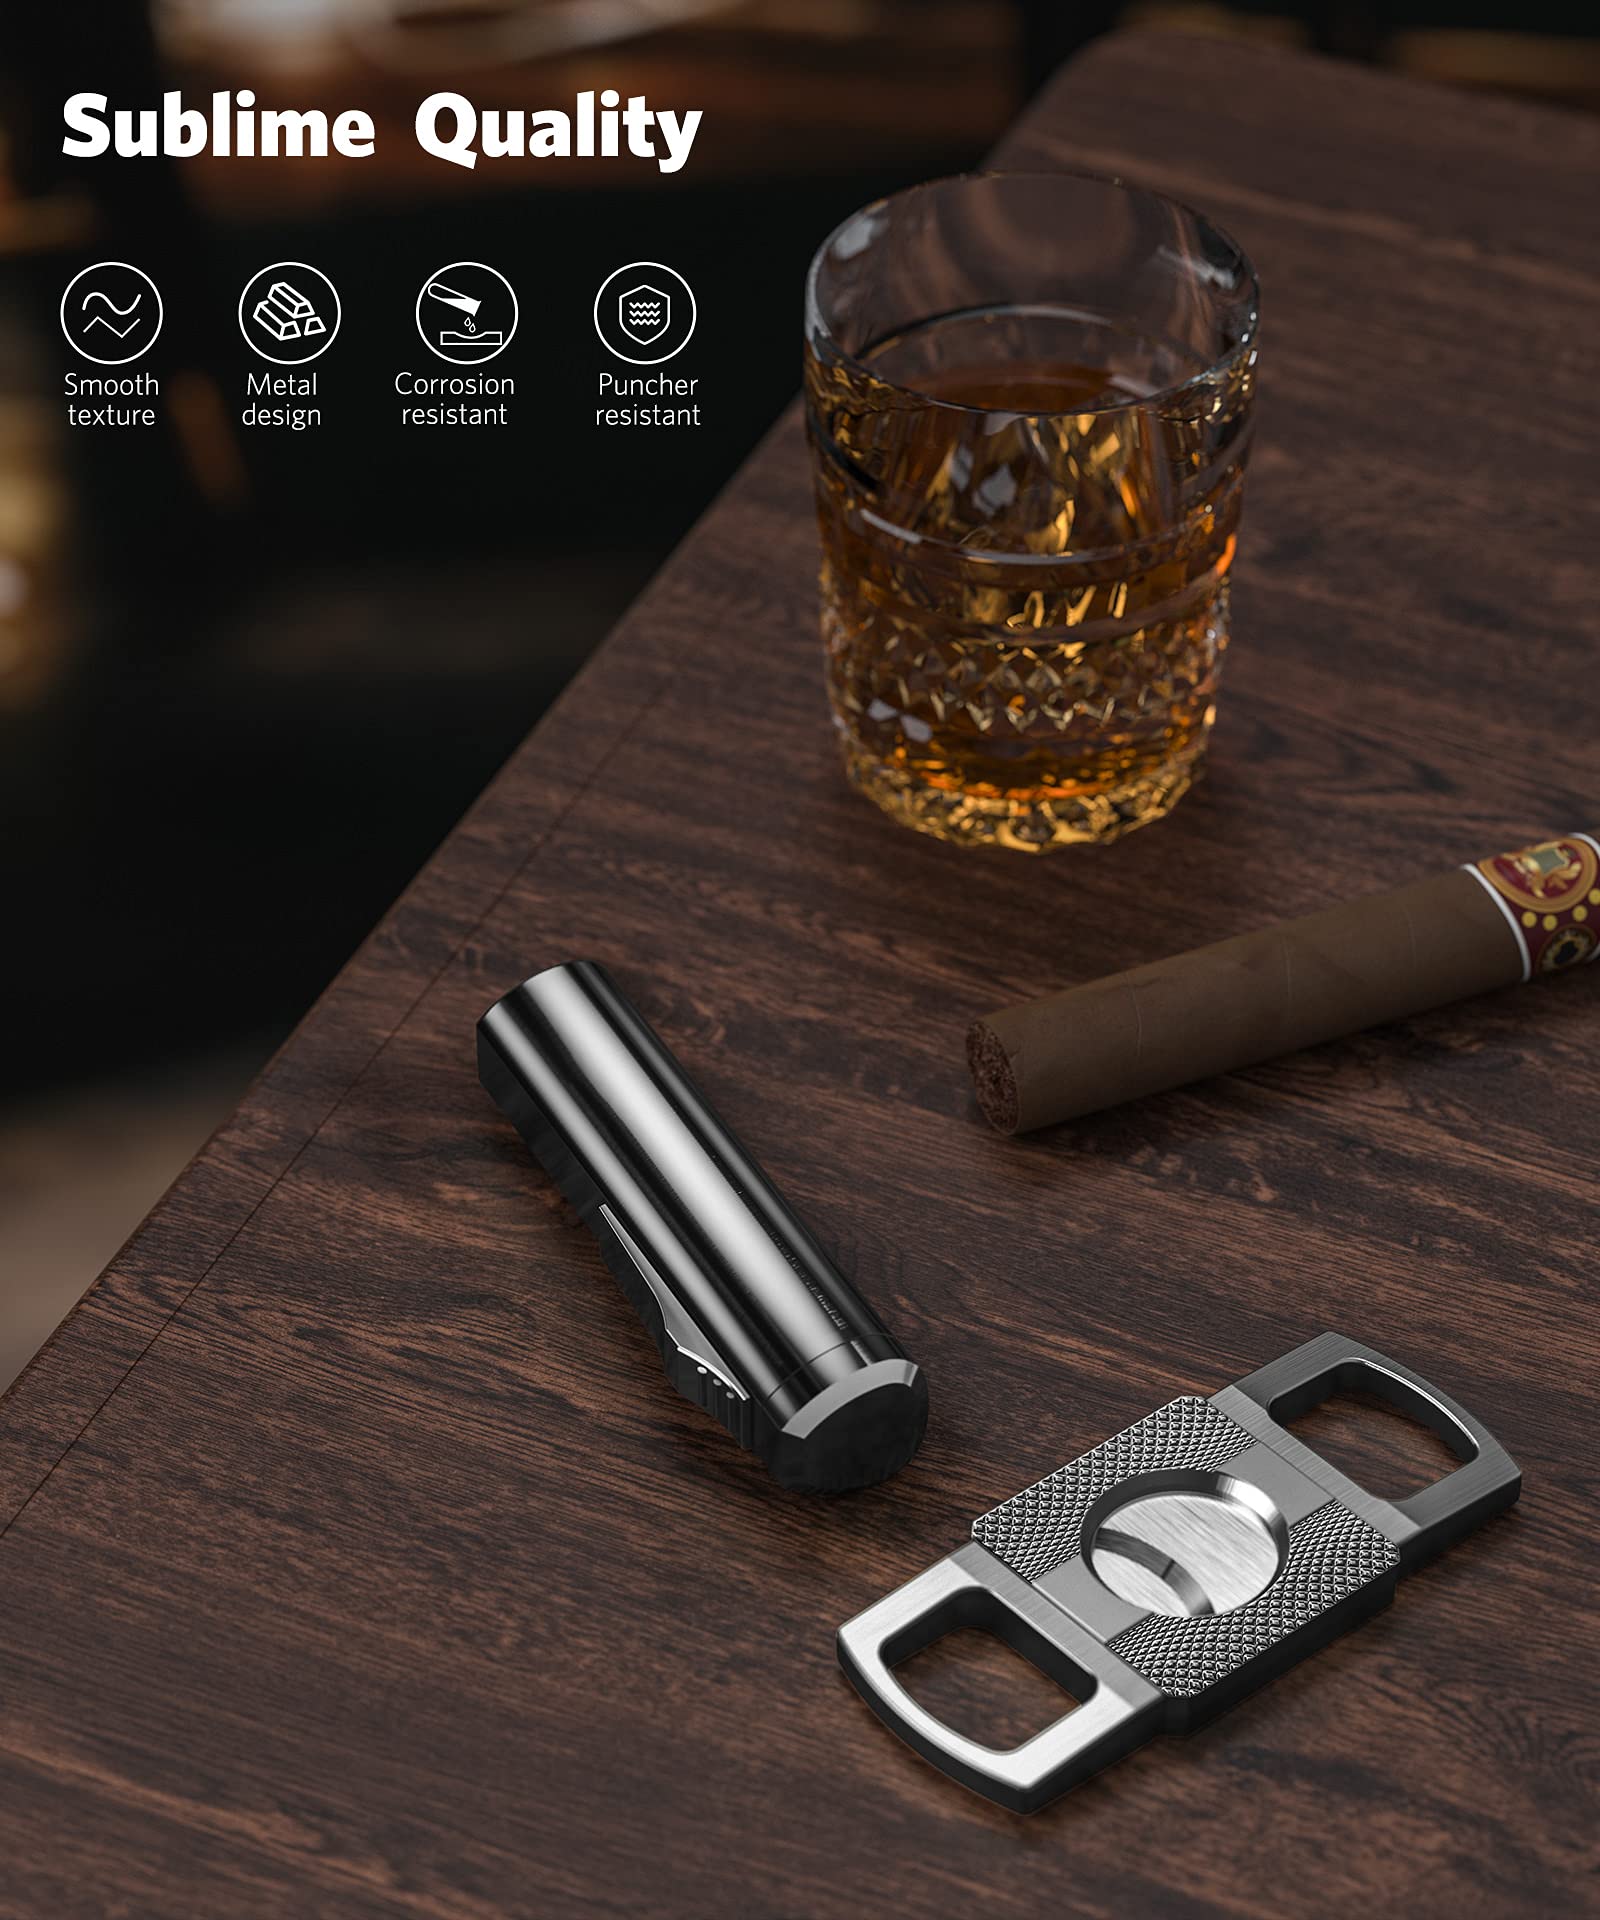 RONXS Torch Lighter and Cigar Cutter Set, Adjustable Triple Jet Flame Cigar Lighter, Windproof Butane Refillable Lighters, Gift for Dad Fathers Day(Butane Gas Not Included)